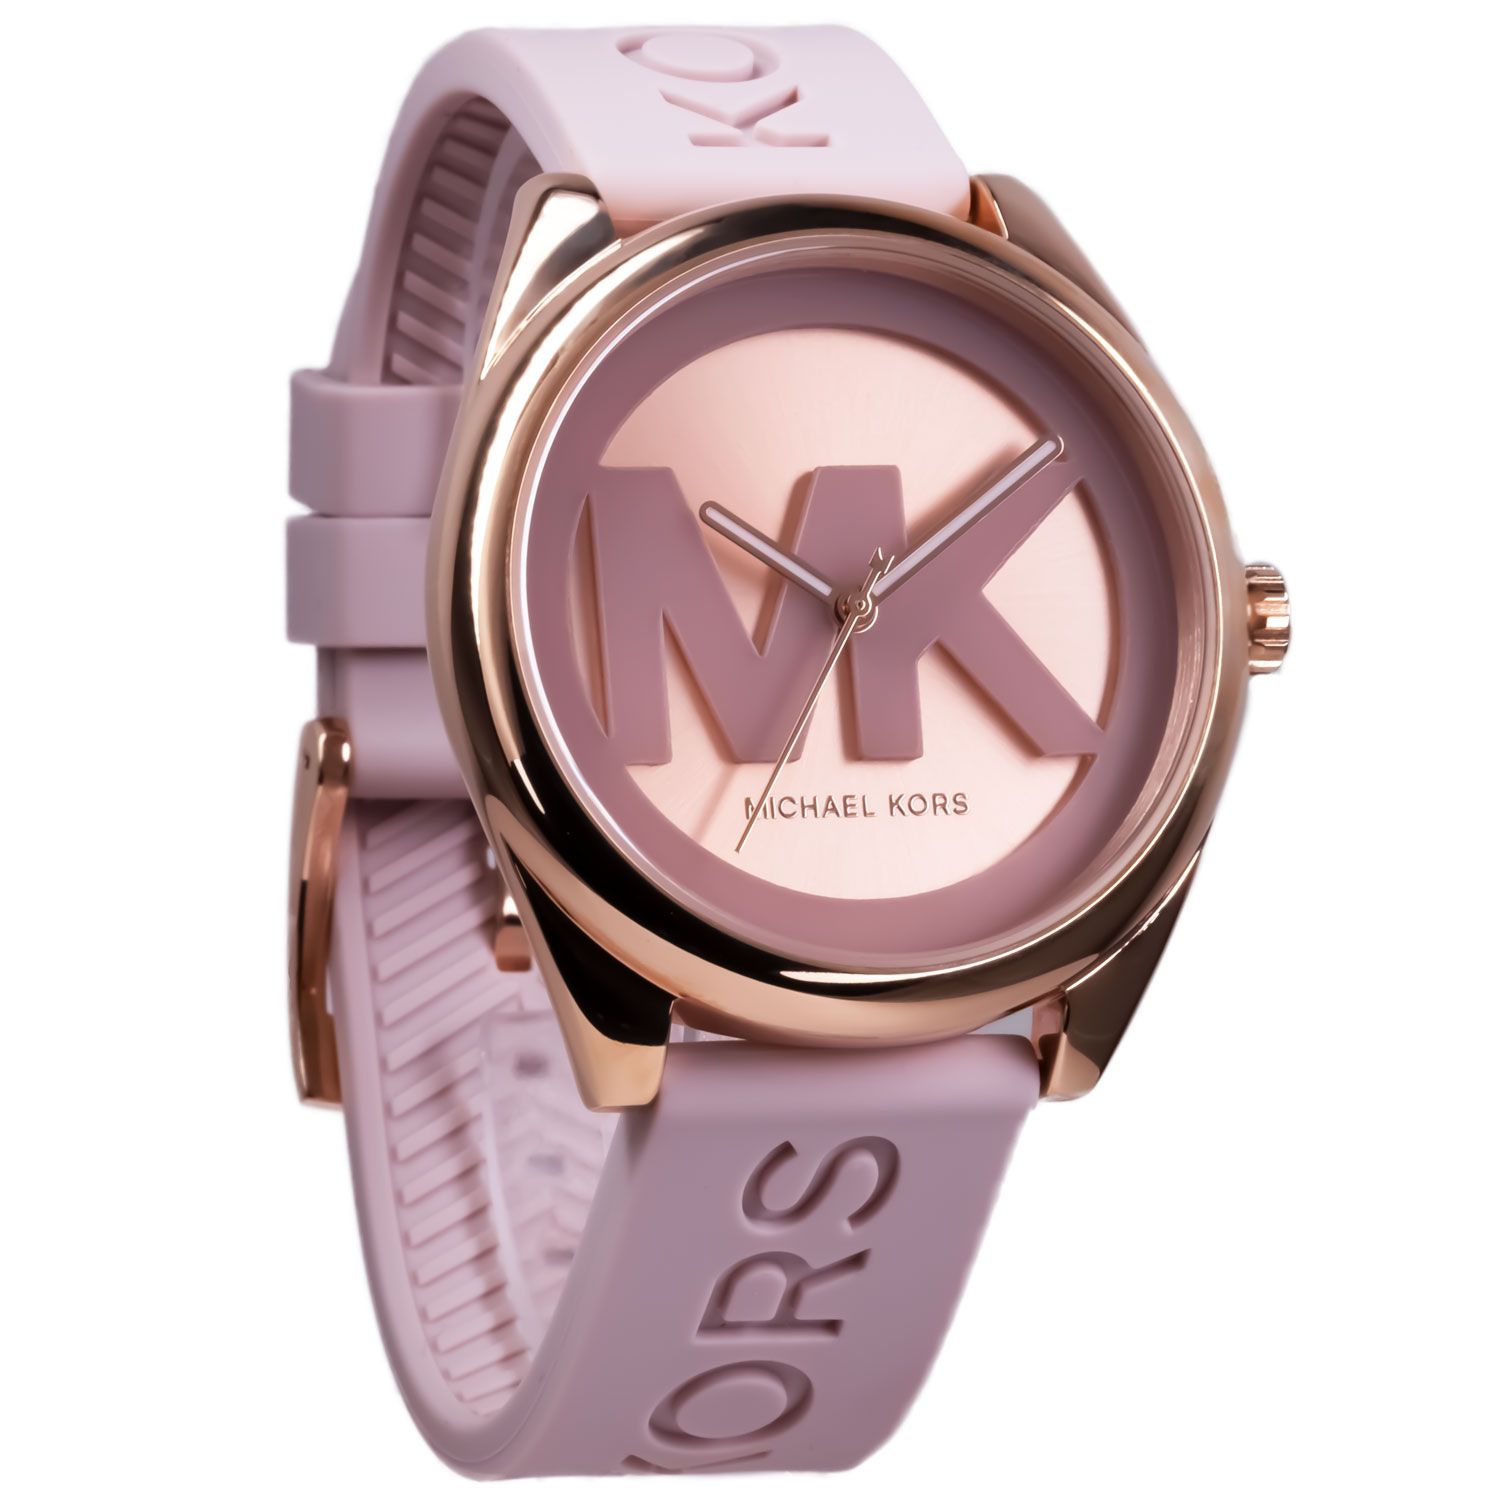 ĐỒNG HỒ ĐEO TAY NỮ MICHAEL KORS RUNWAY JANELLE ROSE GOLD PINK SILICONE WATCH MK7139 5